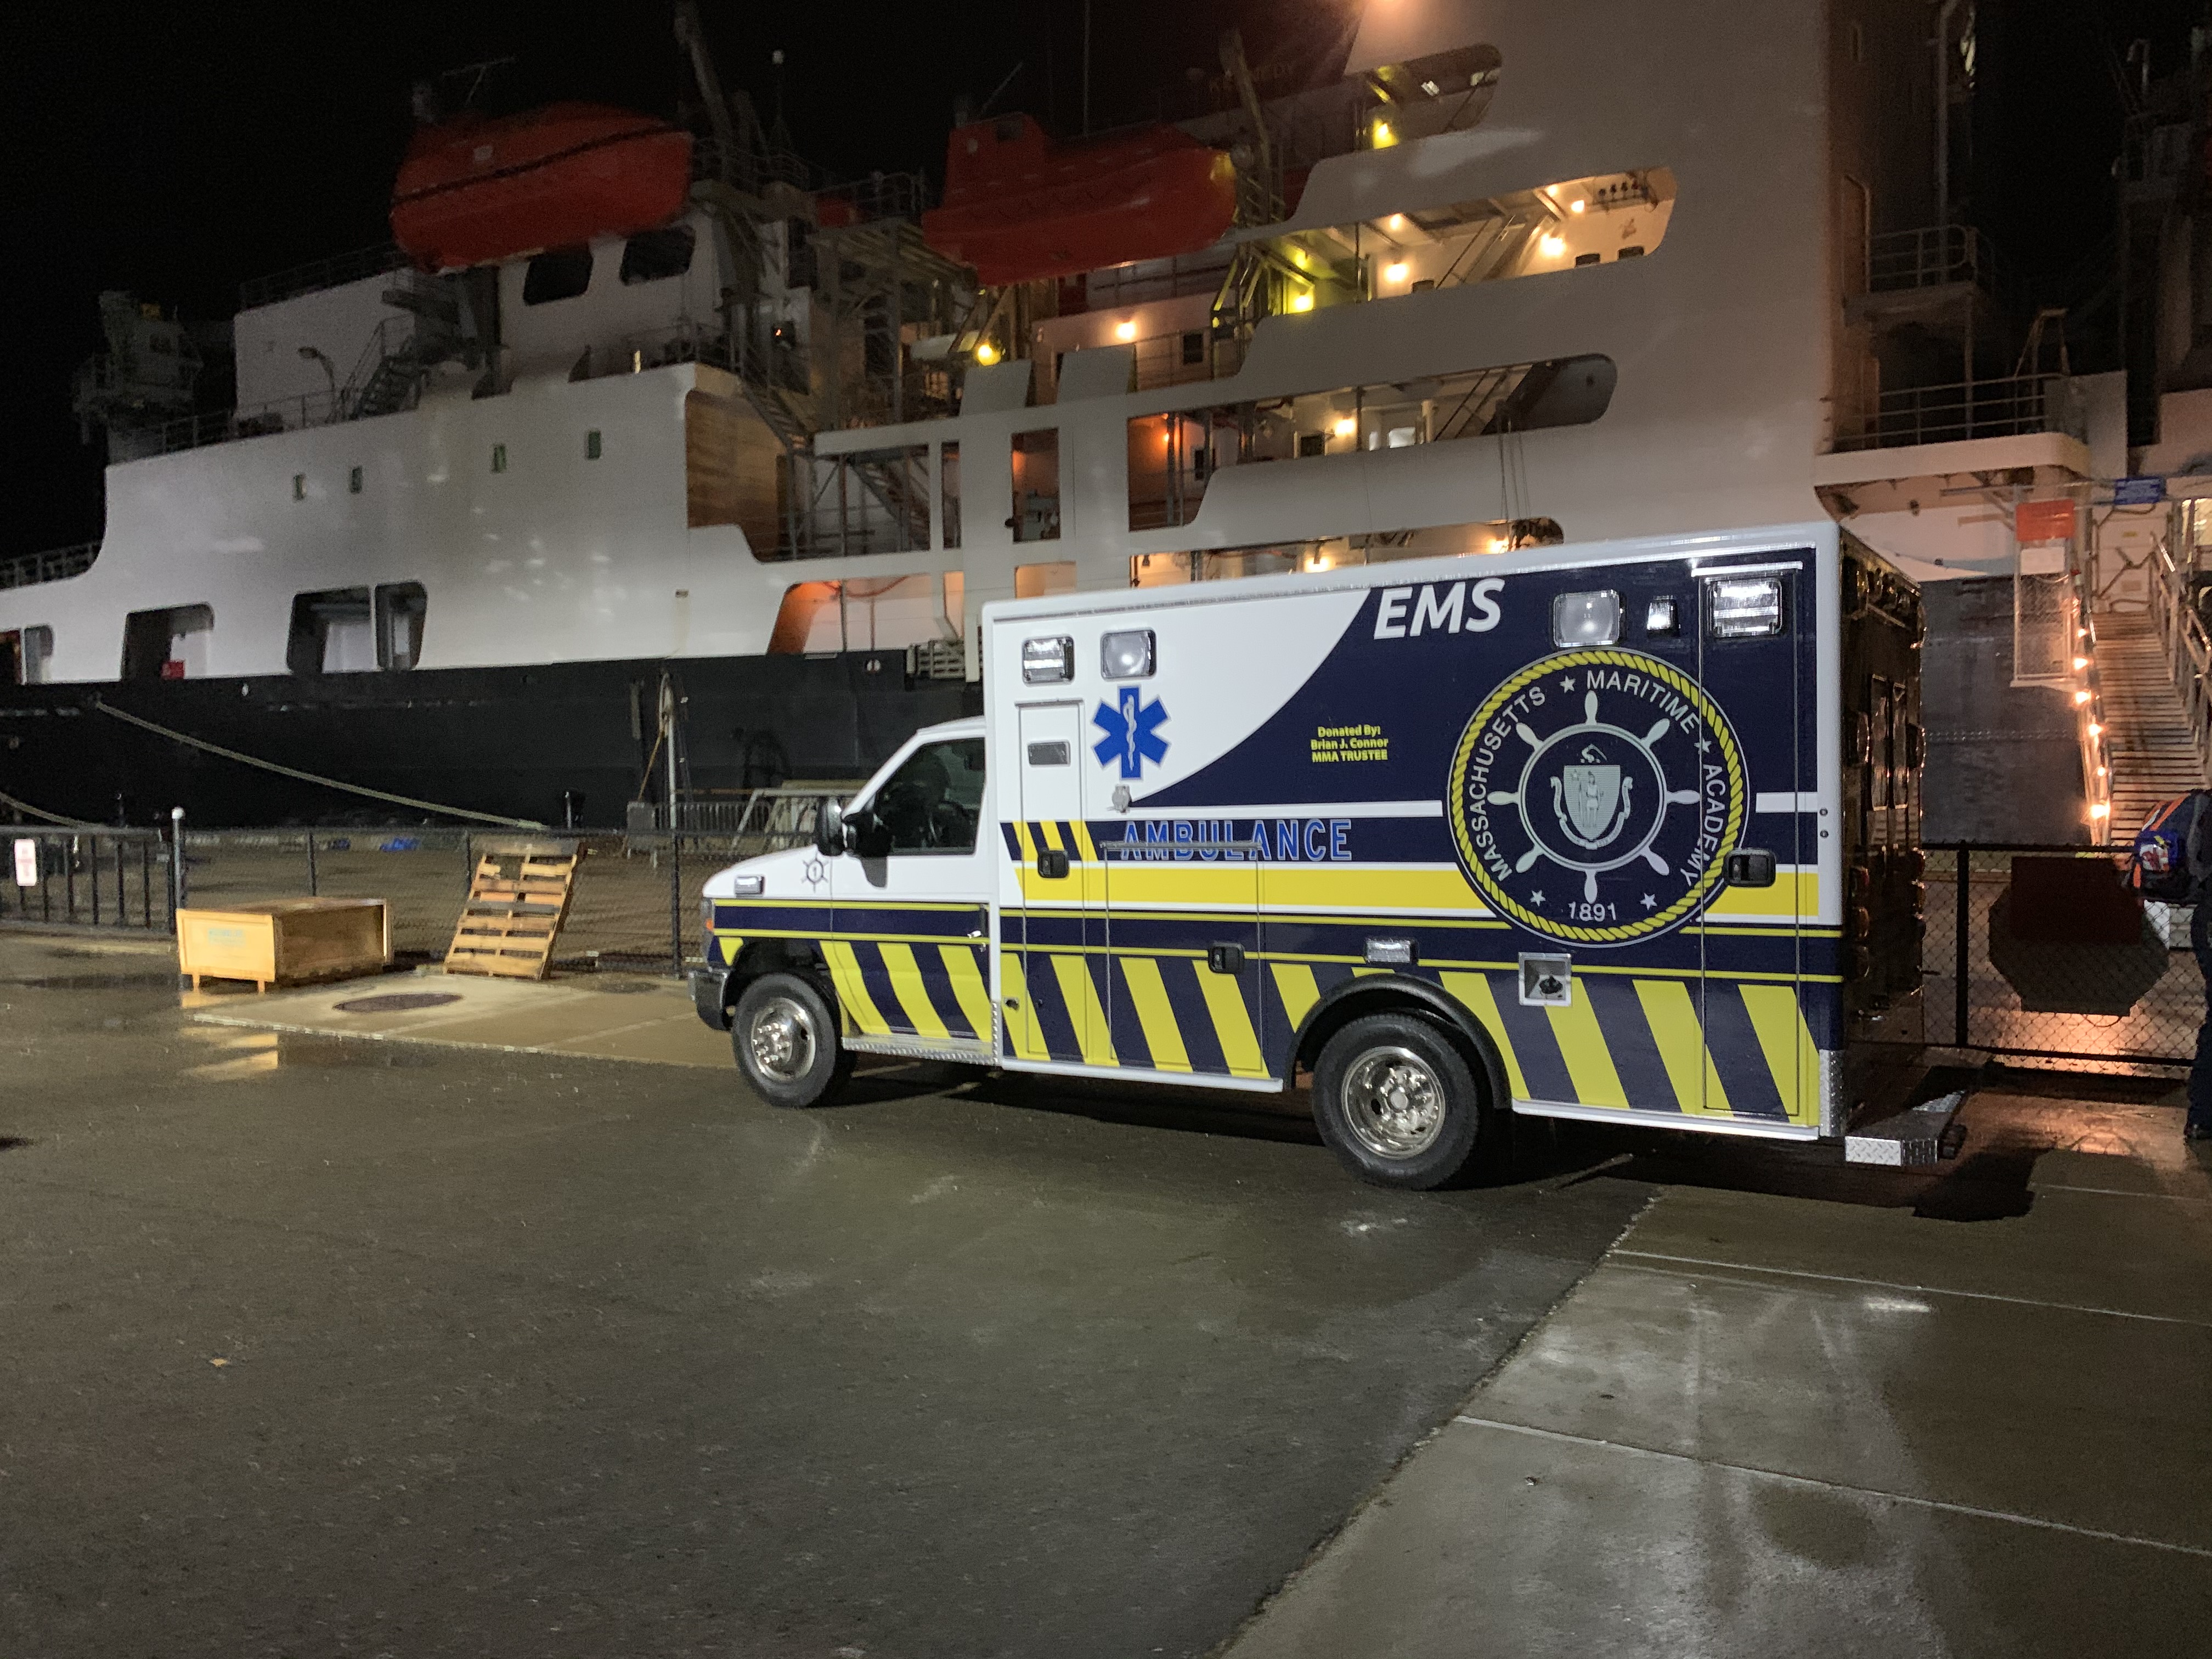 ambulence in front of the ship